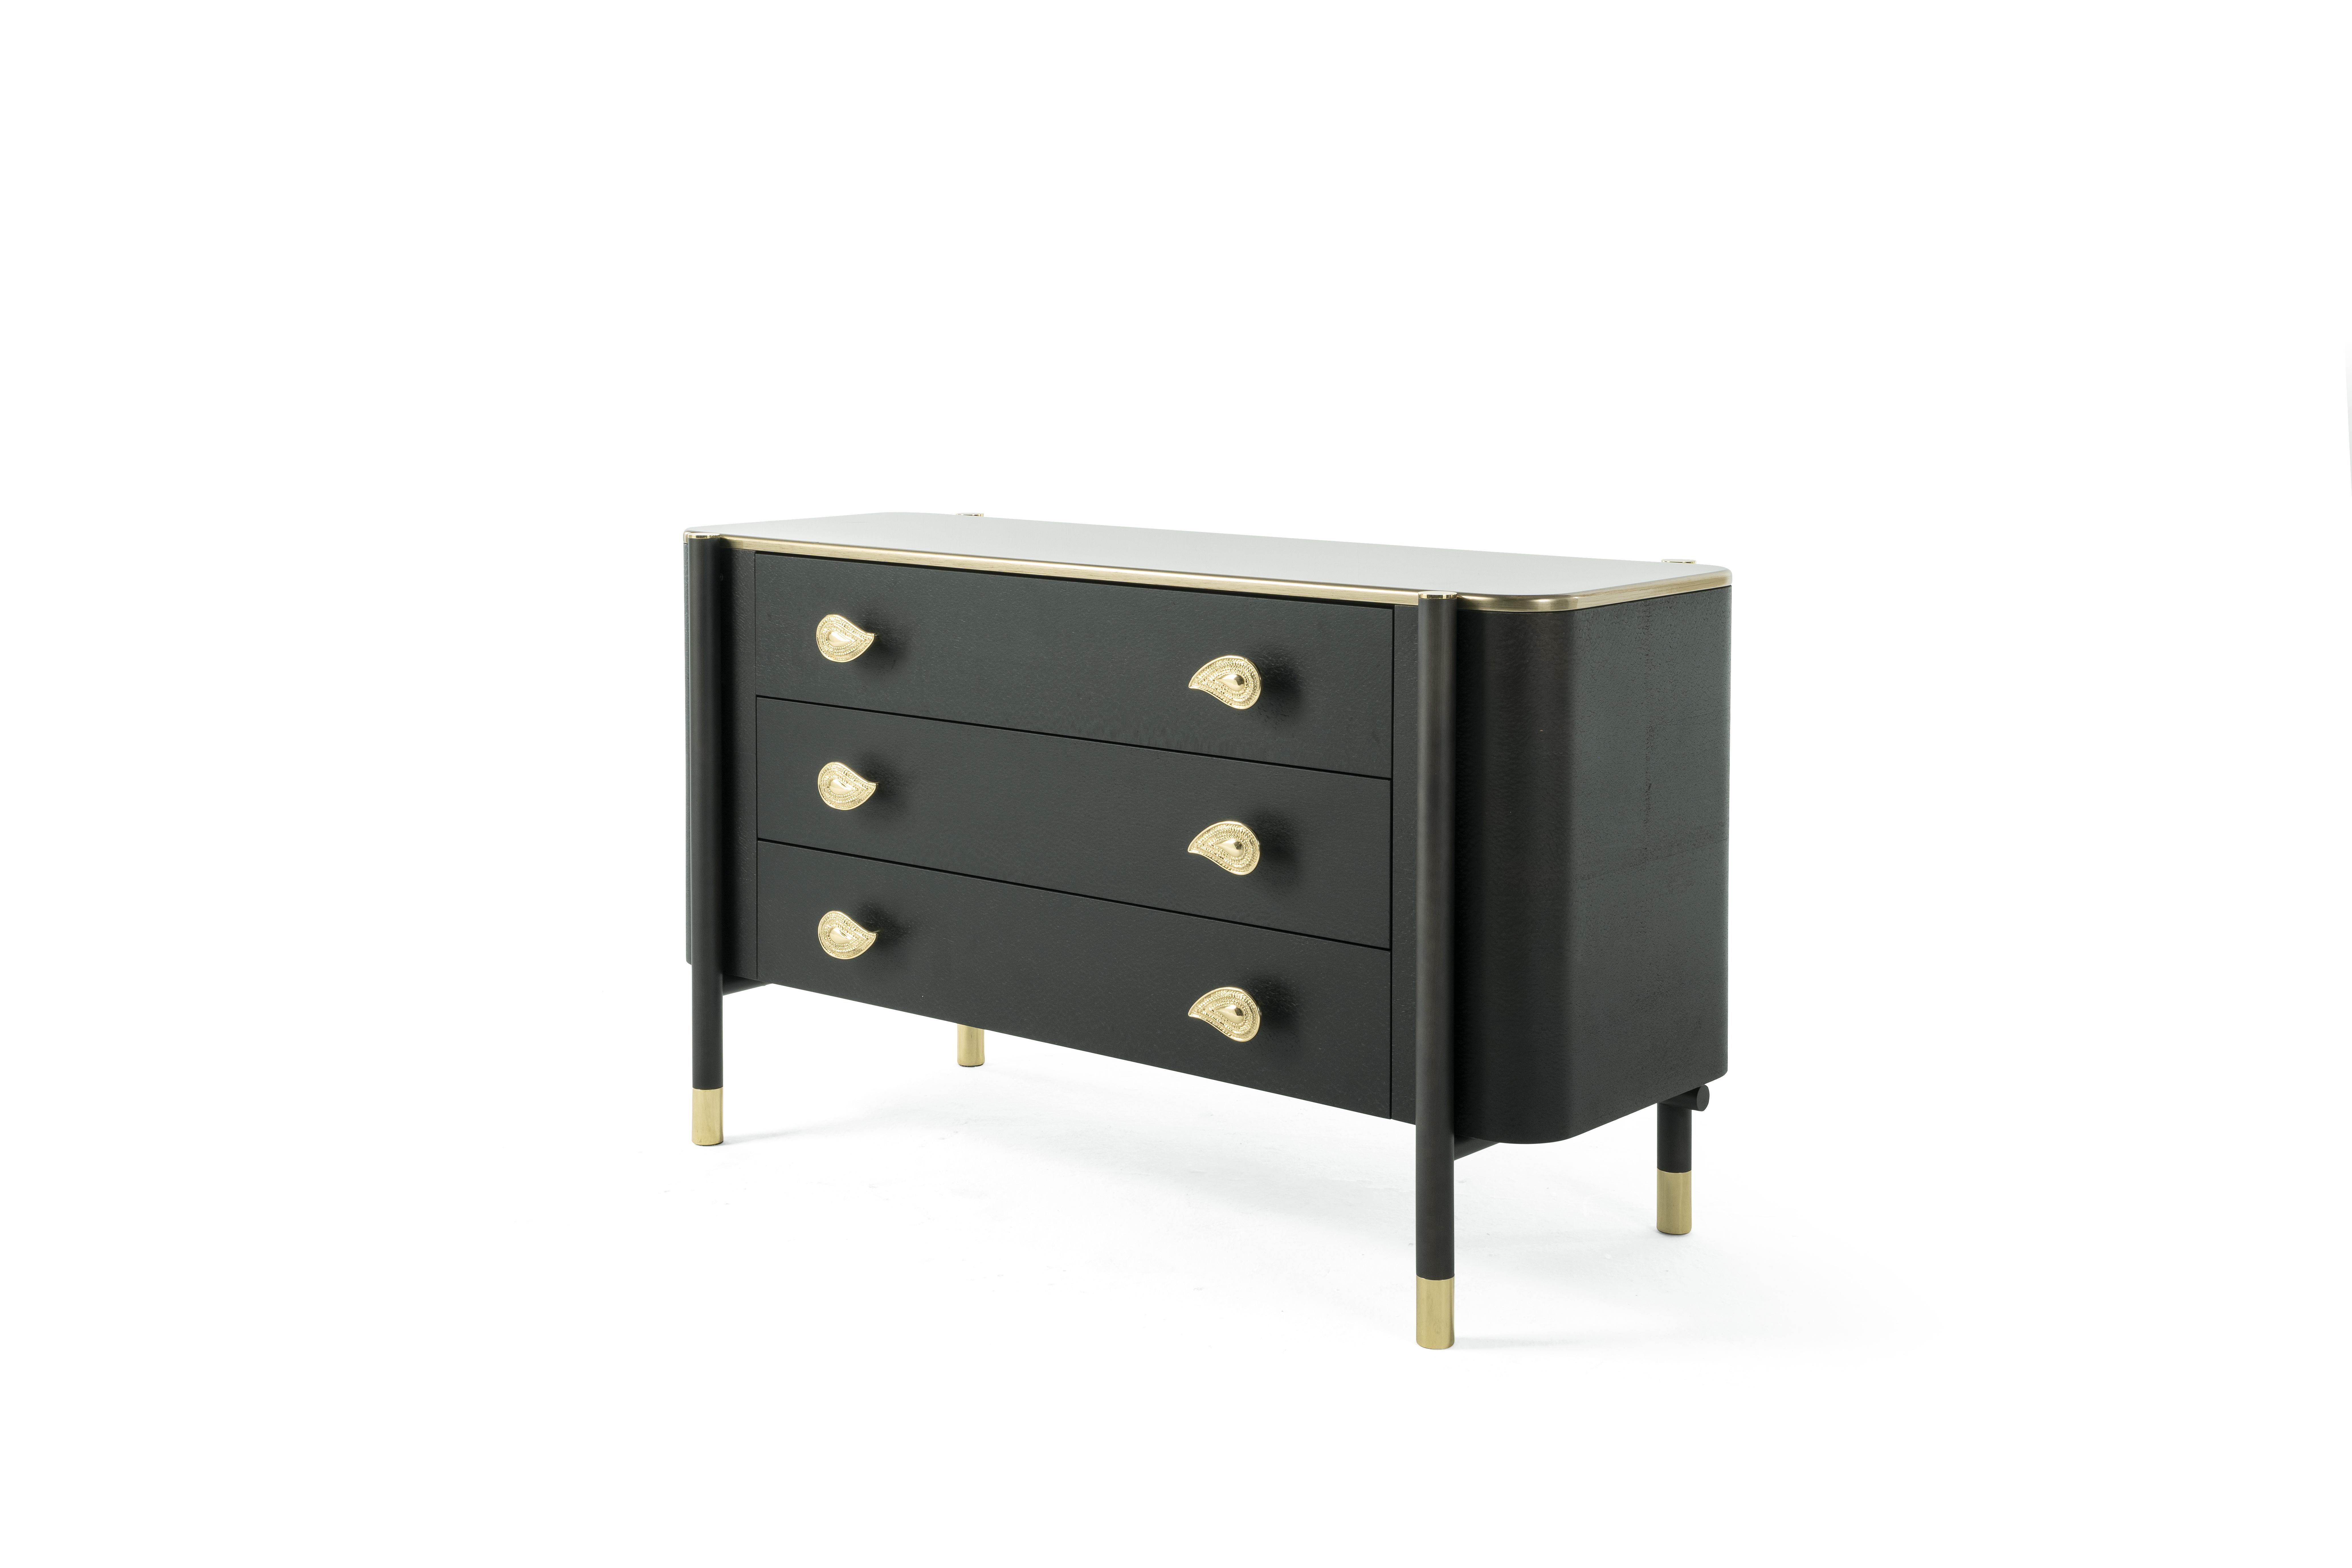 Designed to meet functional and aesthetic needs at the same time, the chest of drawers extends and integrates the Woodstock line. The refined structure with clean and elegant lines is realized in dark wengé dyed wood with tips in polished brass,